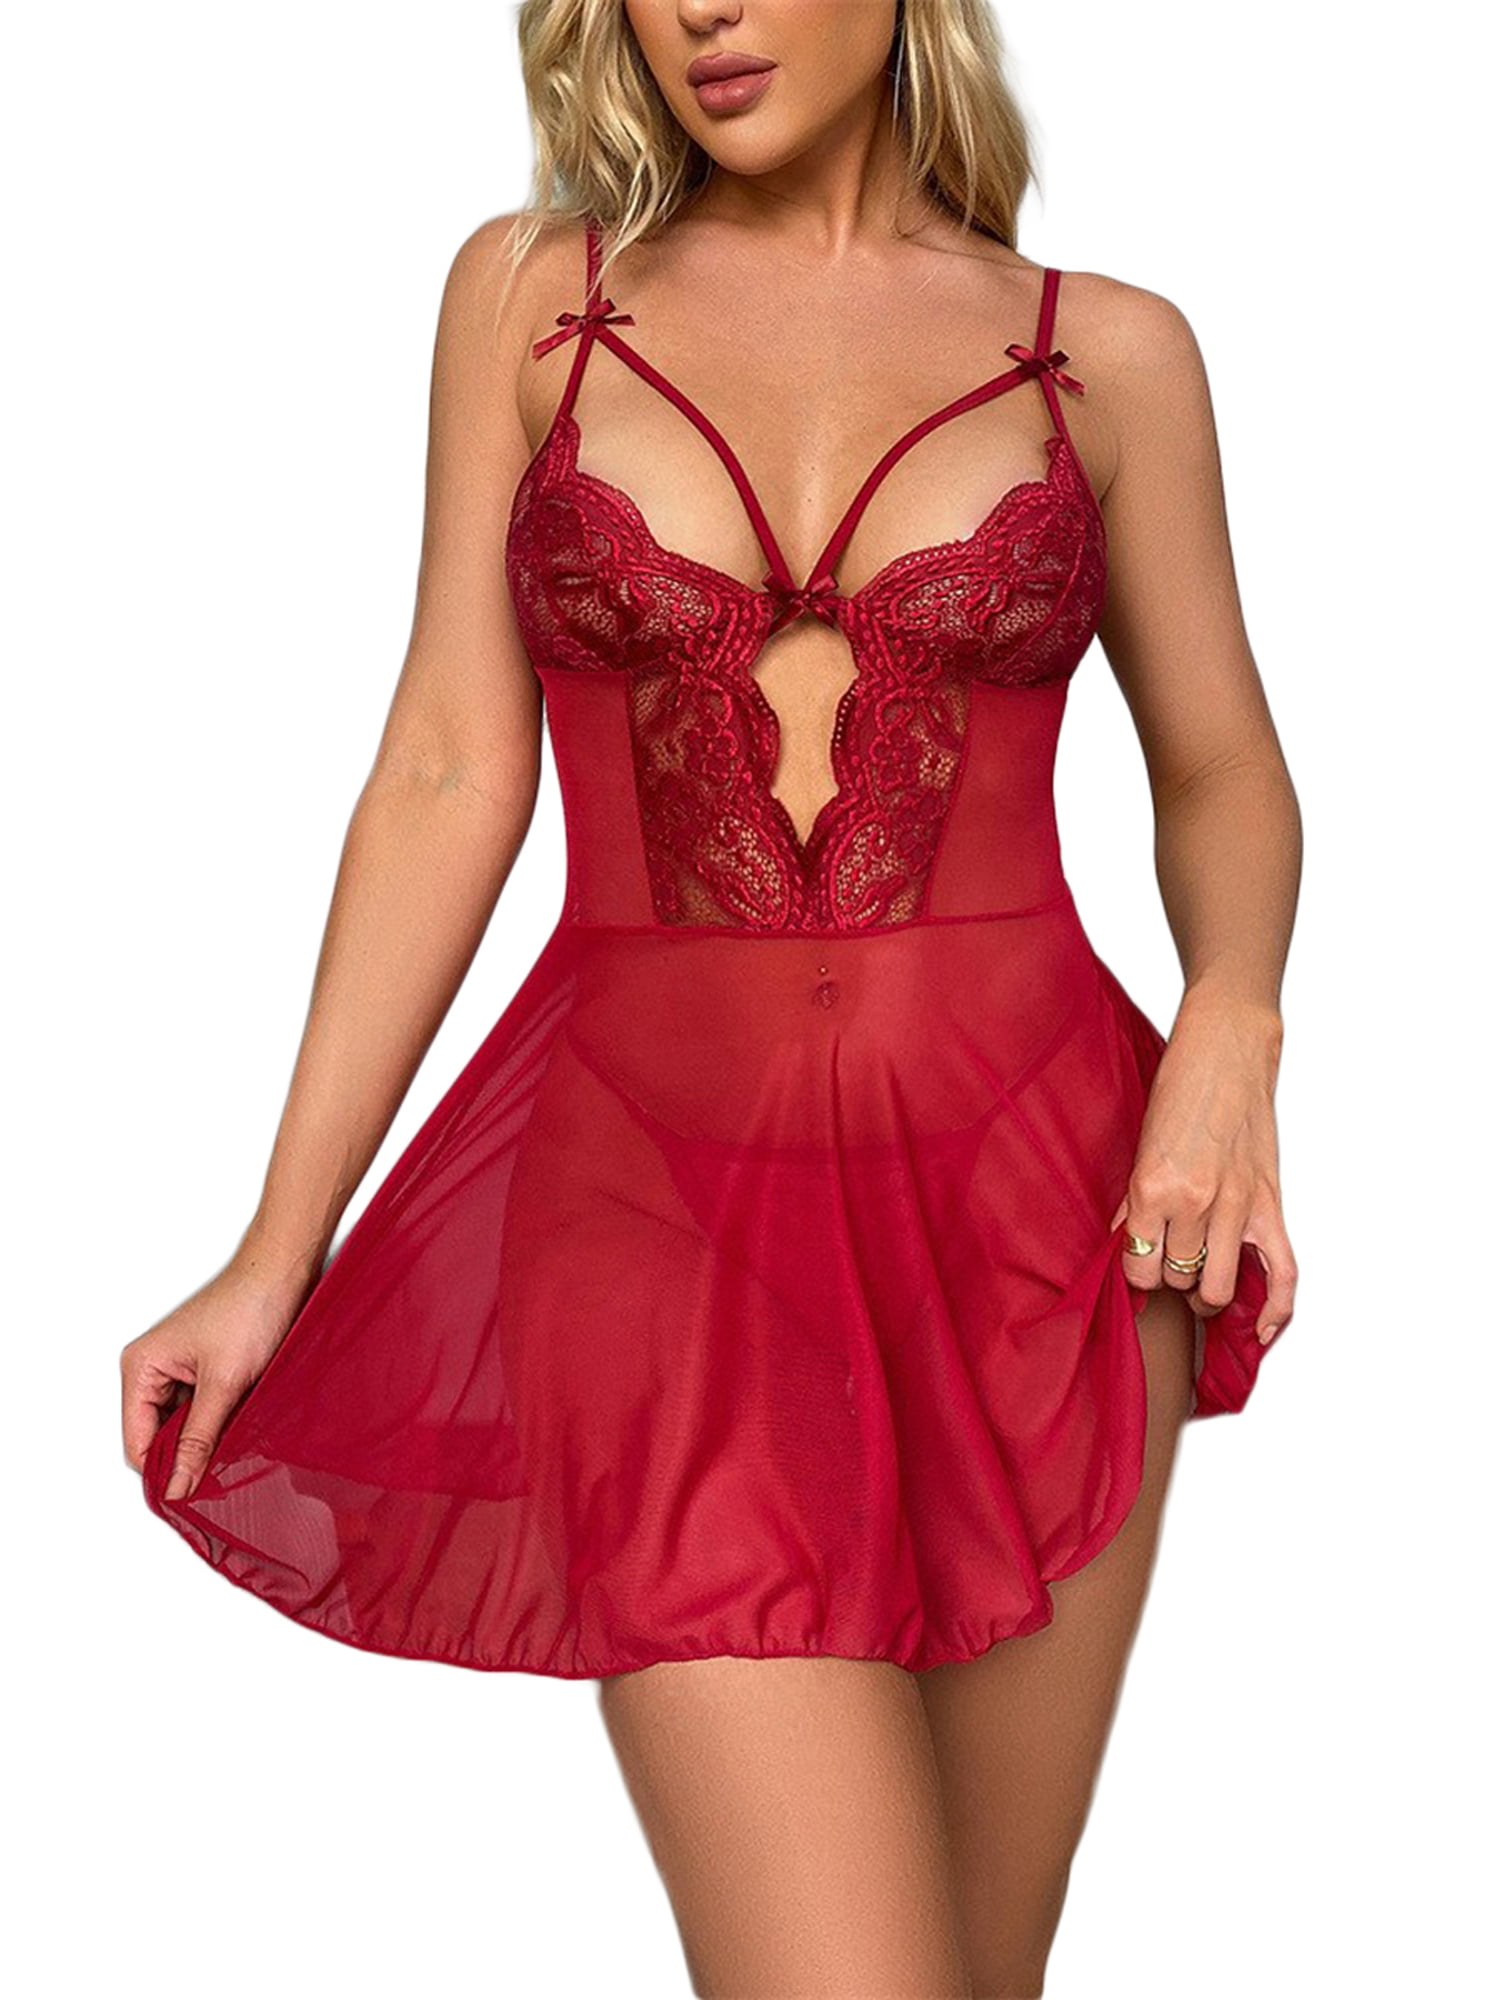 Lingerie for Women Sexy Naughty Push Up Bra Bow Tie Mesh Lace Erotic  Suspender Nightgown See-Through Nightgown